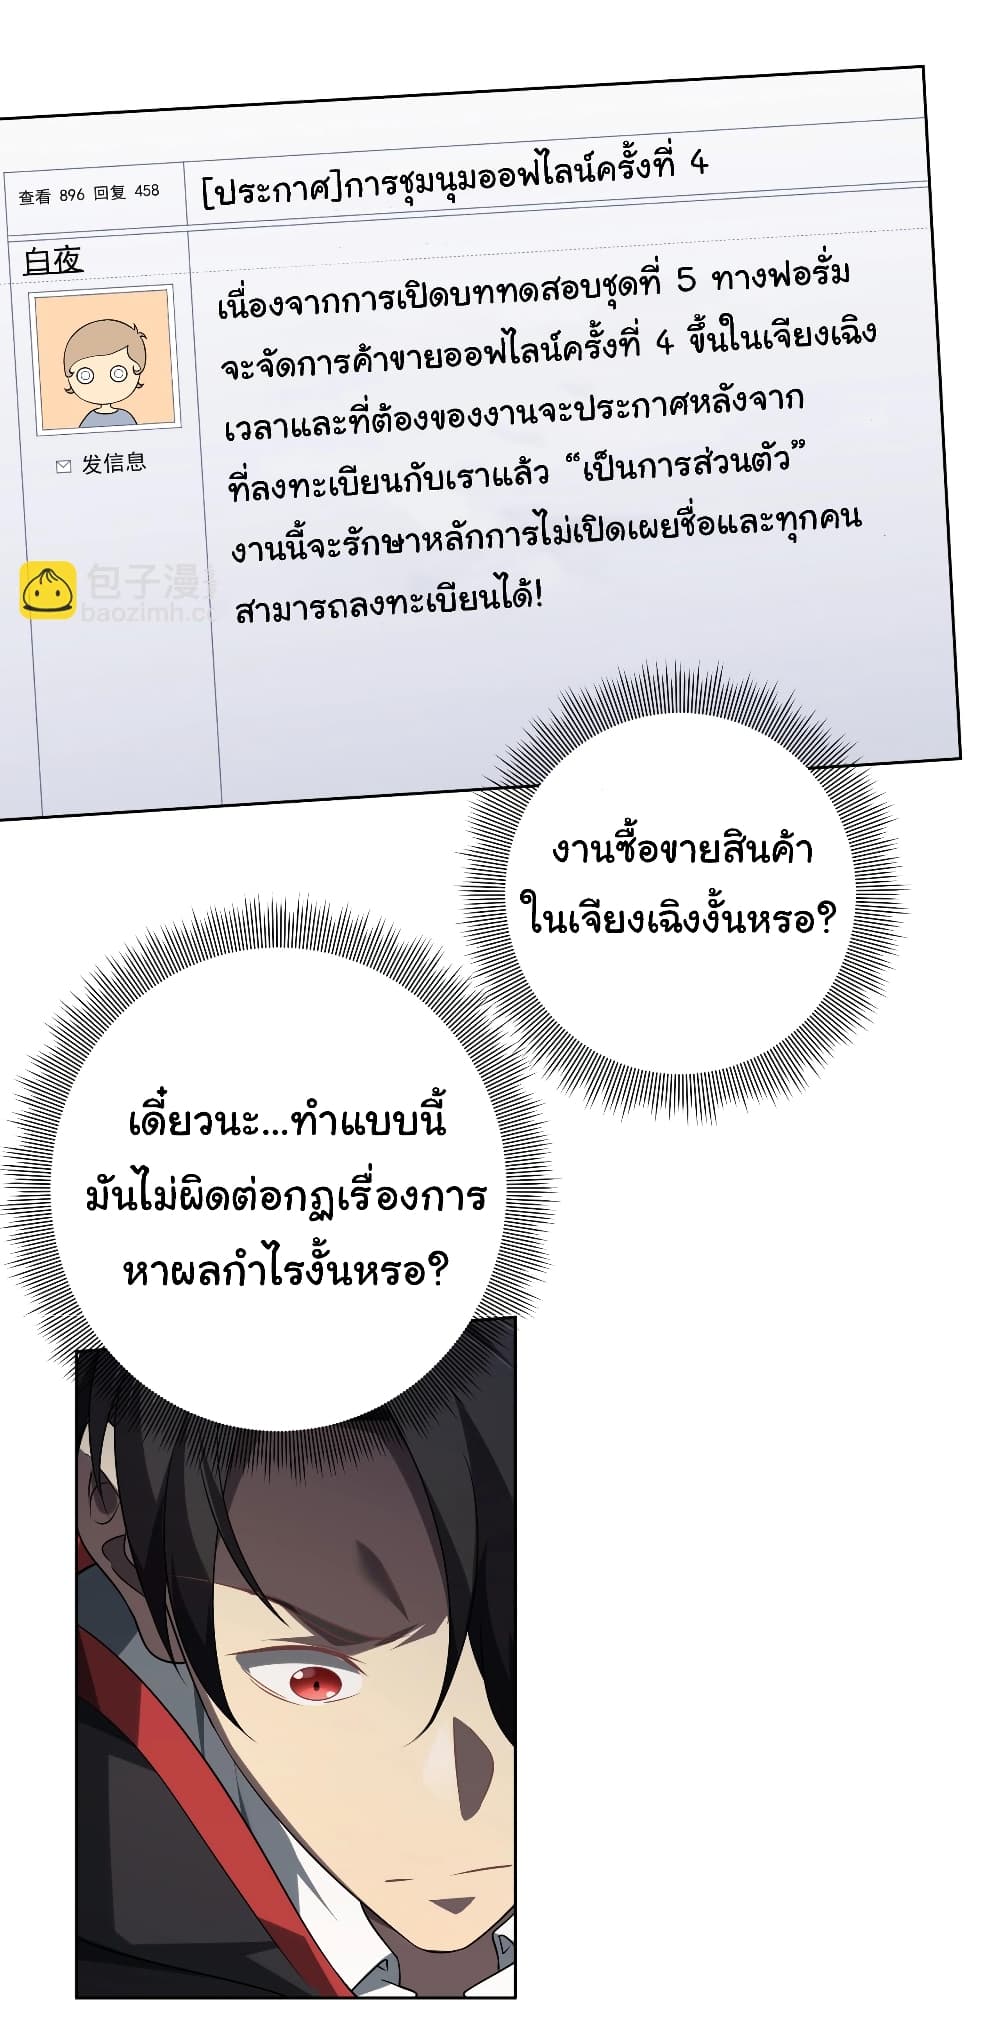 Start with Trillions of Coins ตอนที่ 11 (26)